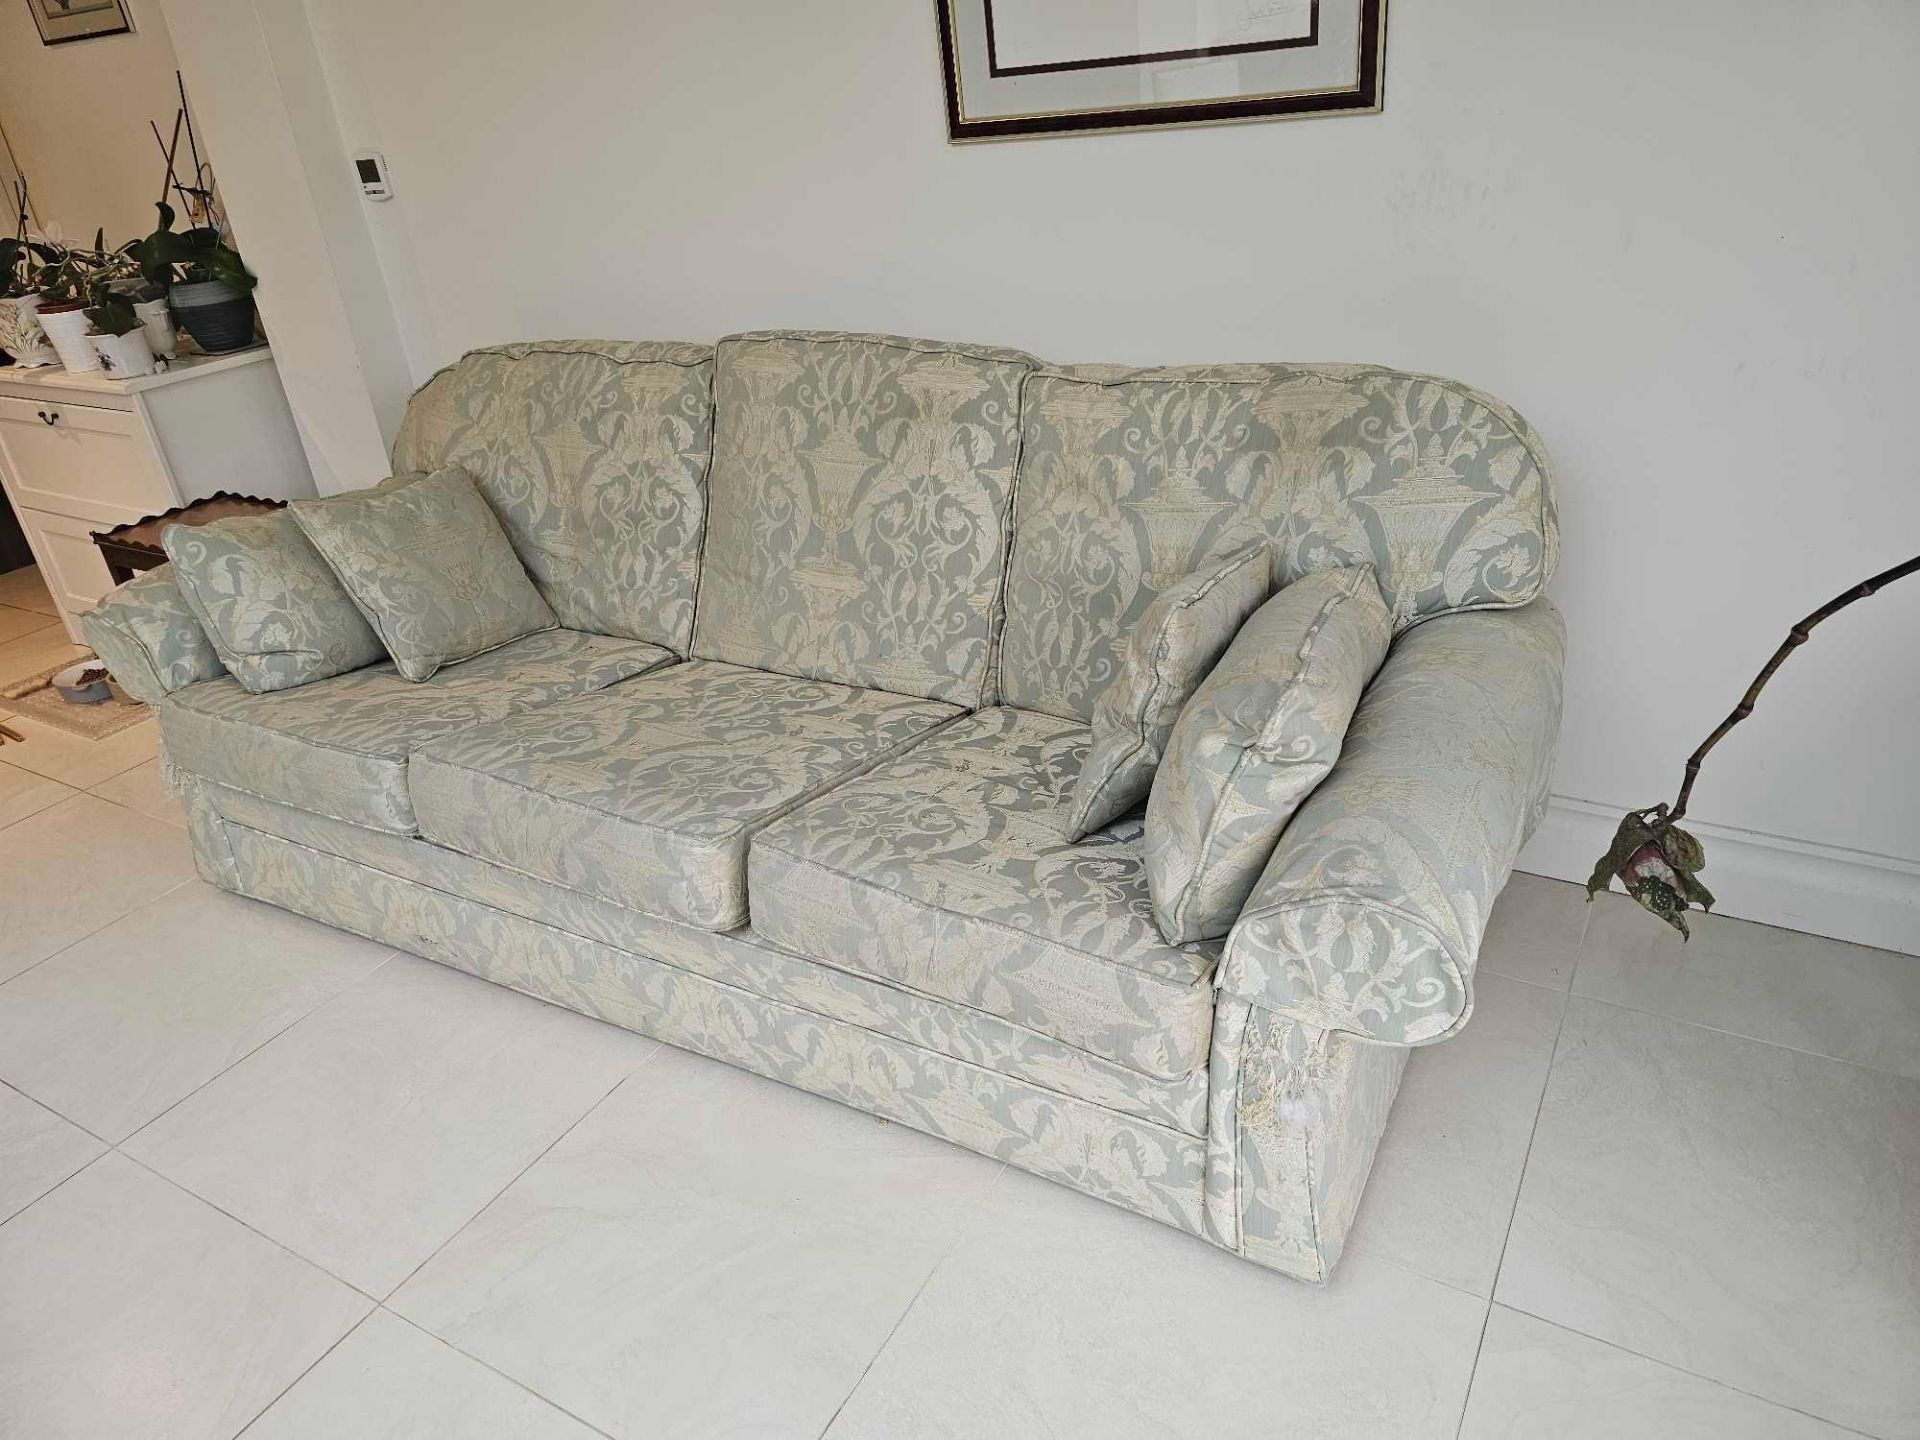 A Peter Guild Upholstered Three Seater Sofa In Damask Embossed Pattern Mint And Gold 235 X 87 X 95cm - Image 3 of 7